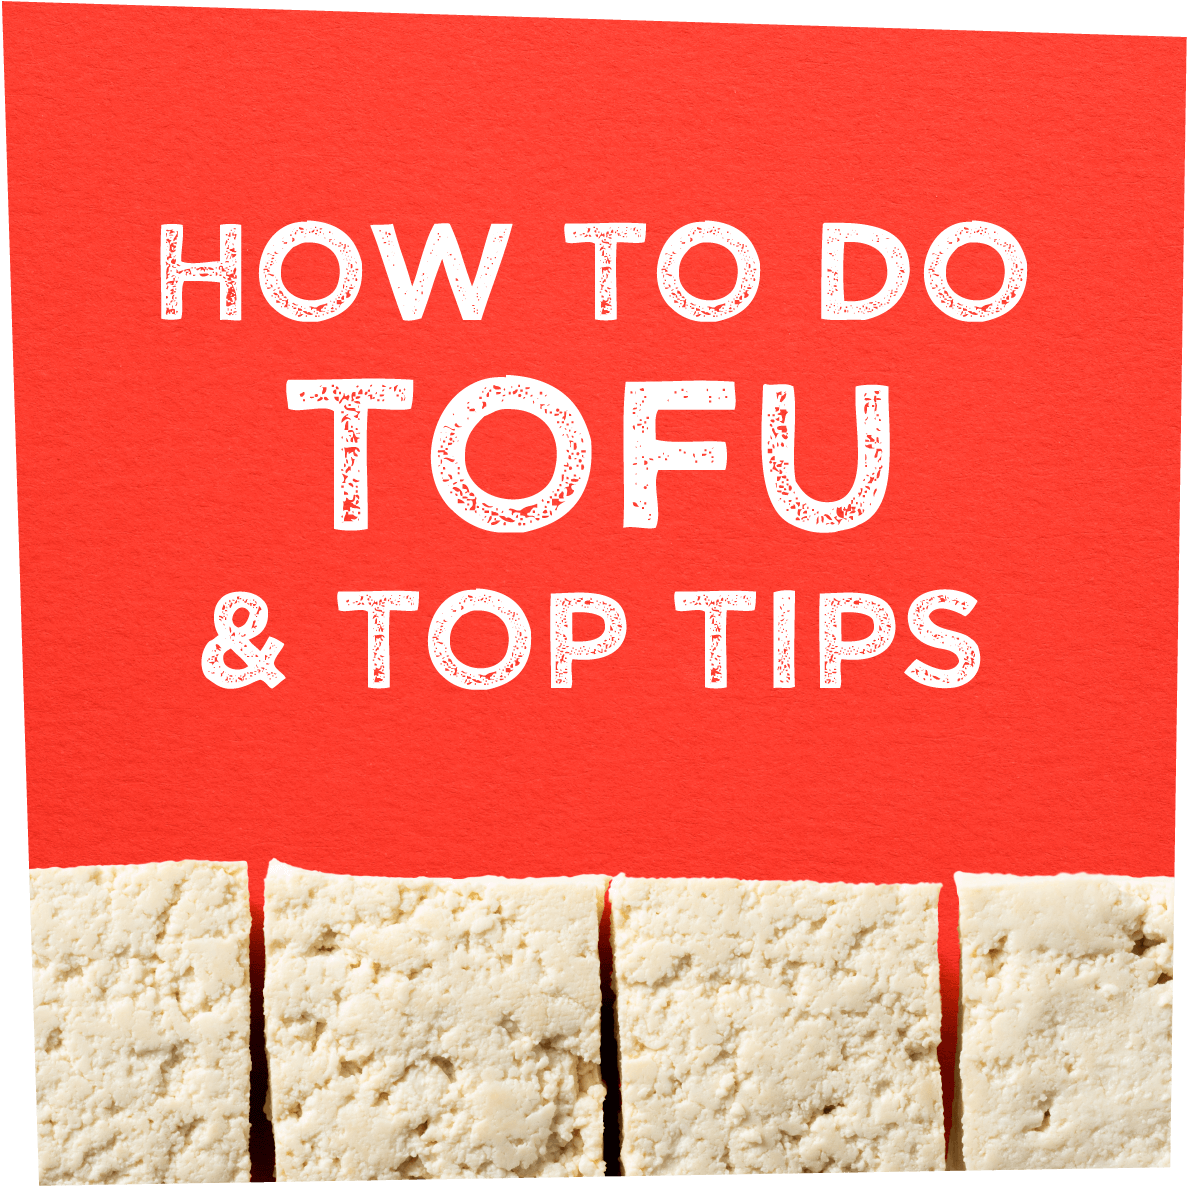 How to do Tofoo & Top Tips